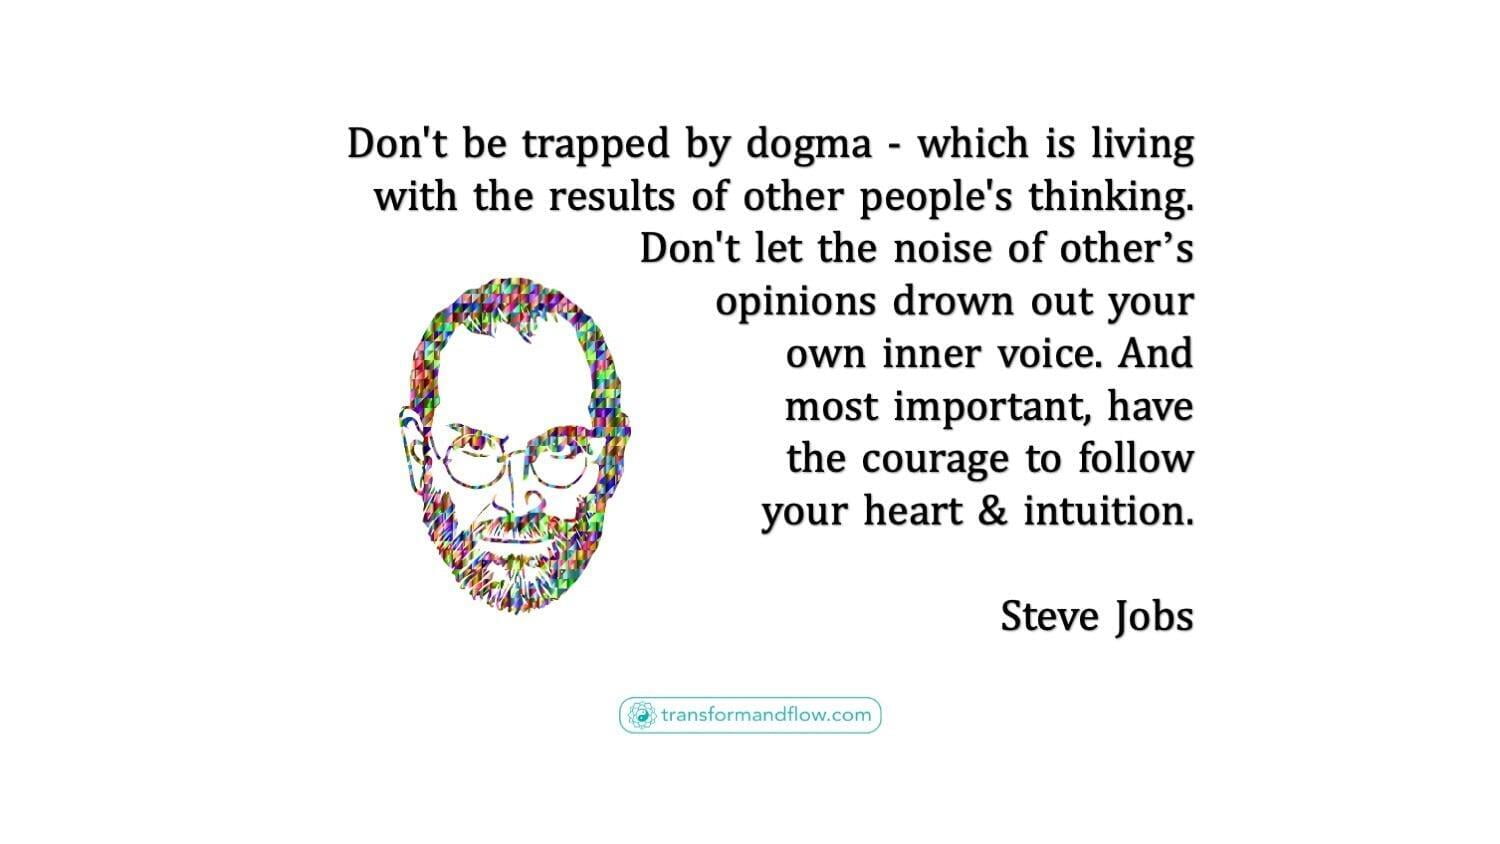 Don't be trapped by dogma - which is living with the results of other people's thinking. Don't let the noise of other's opinions drown out your own inner voice. And most important, have the courage to follow your heart & intuition. Steve Jobs